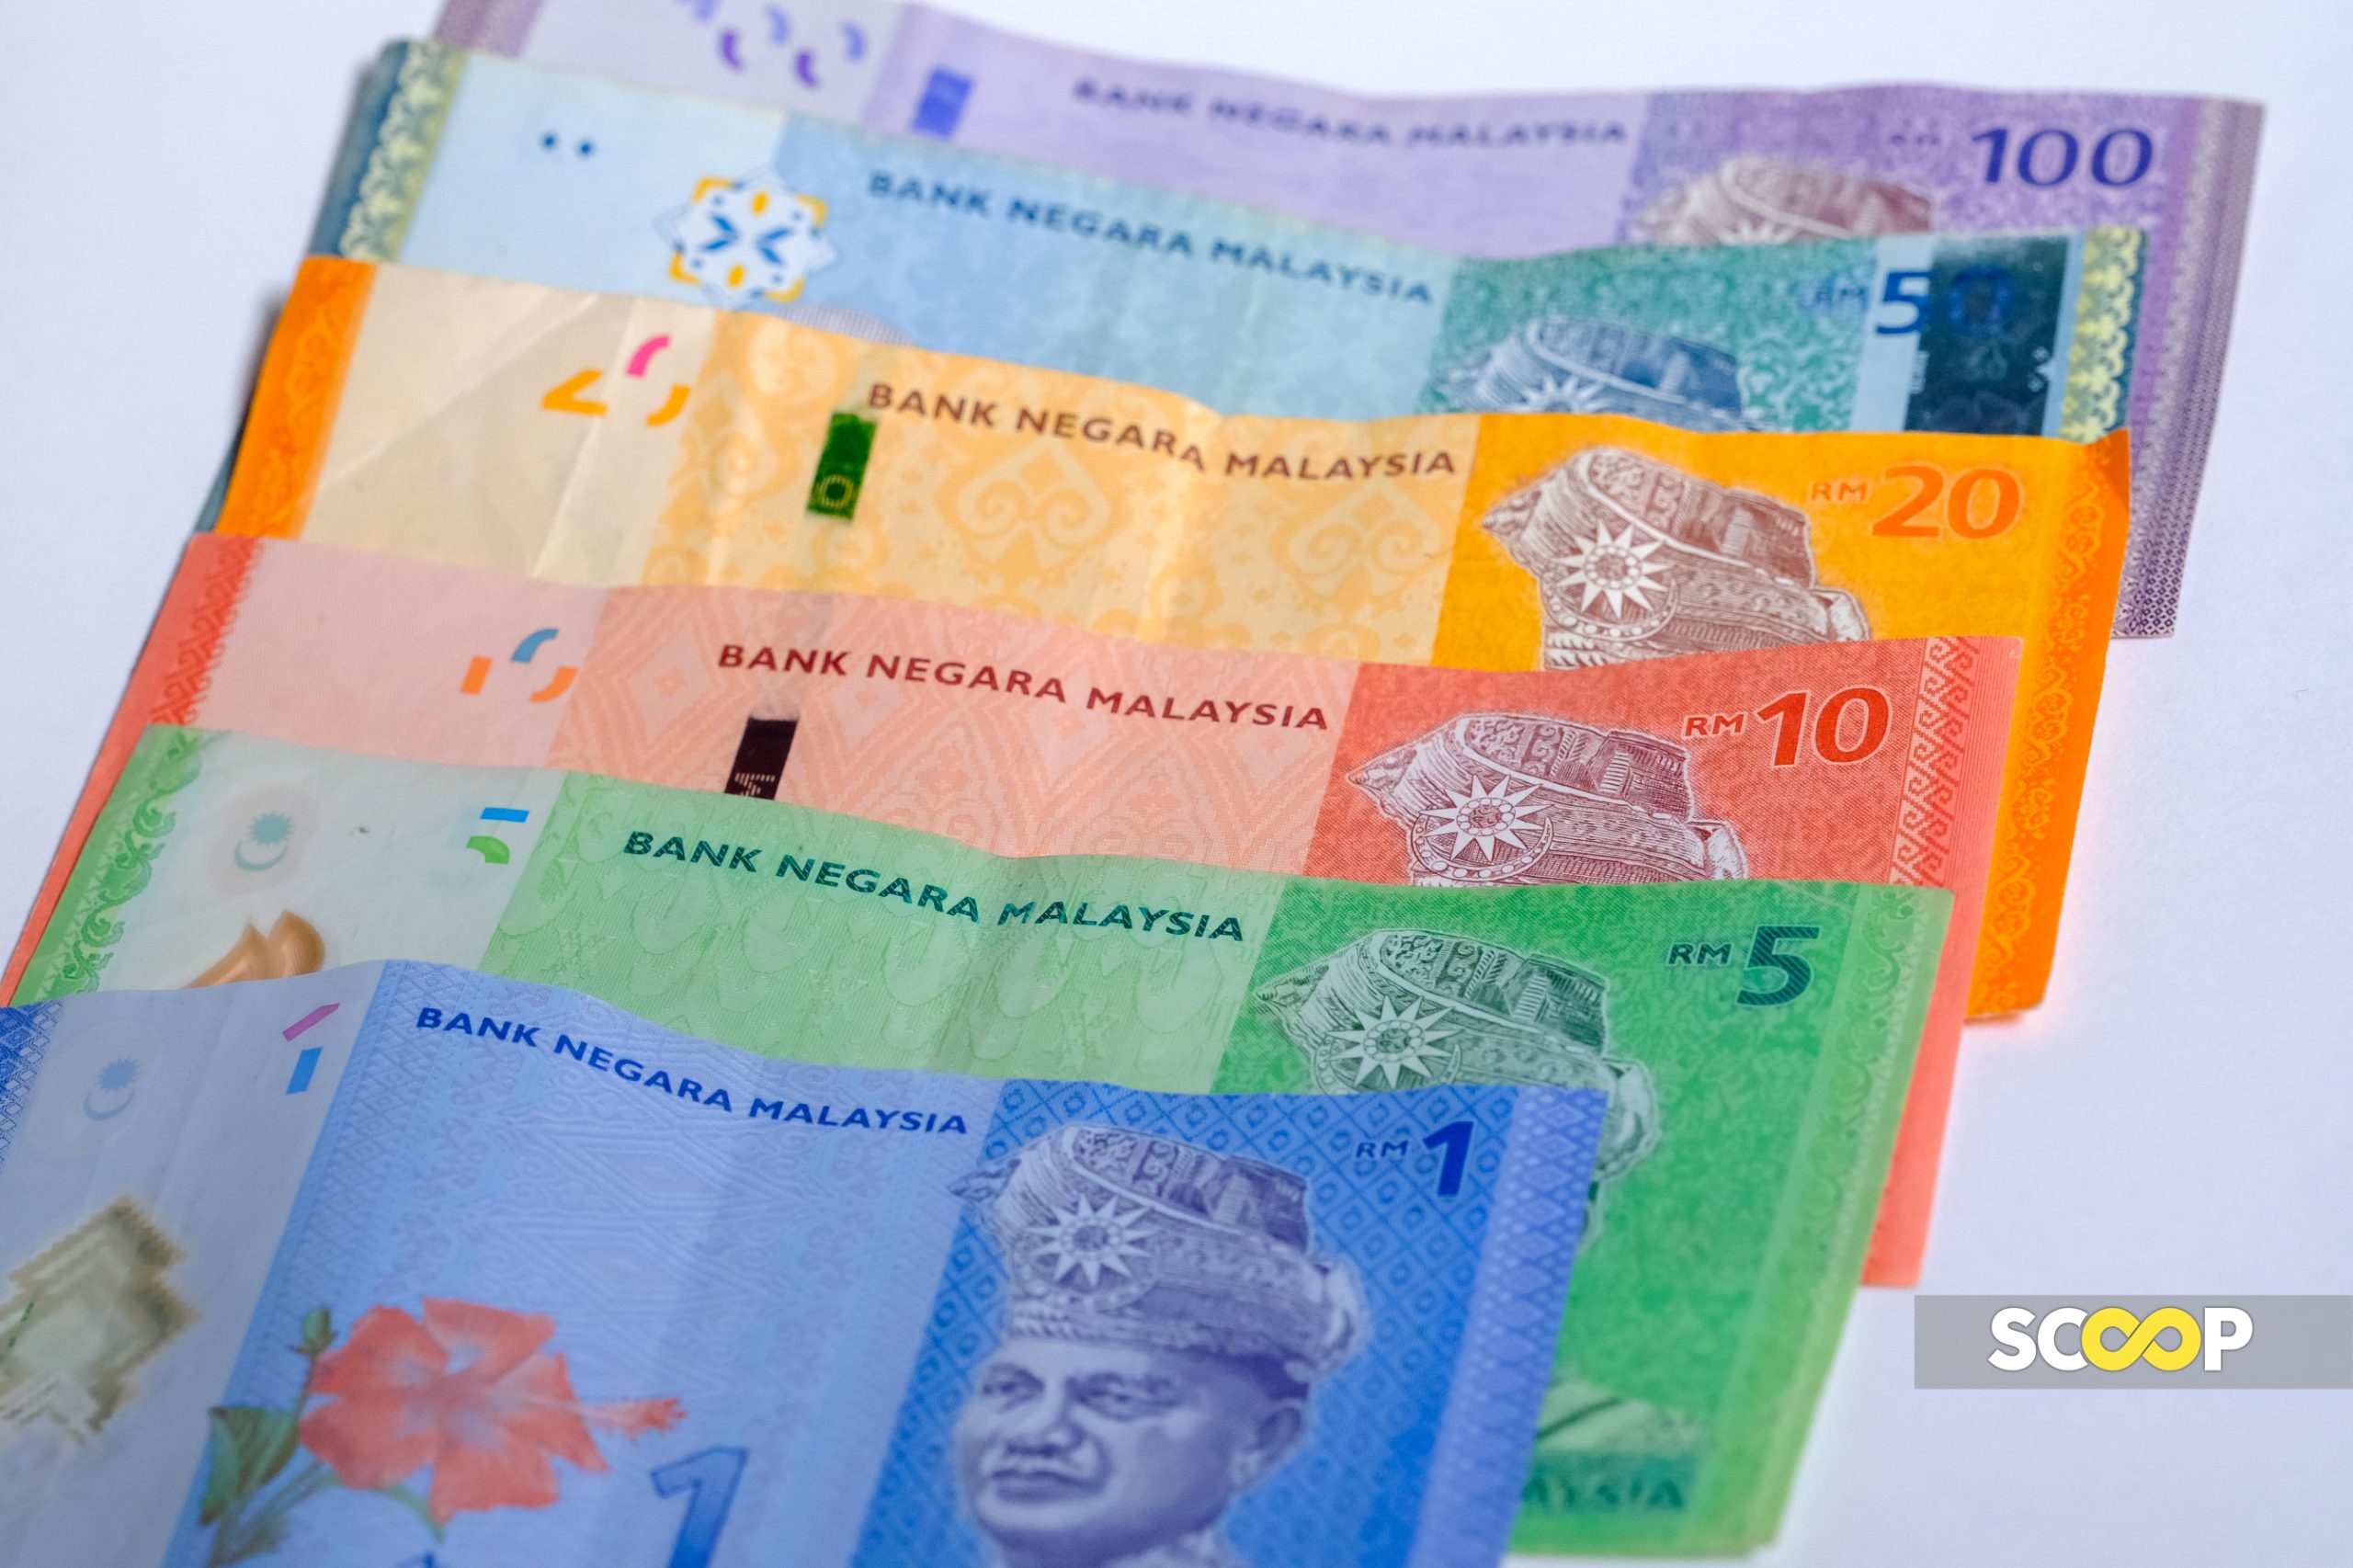 The ringgit needs economic reform, not yet another bout of political hot air – Zainul Arifin